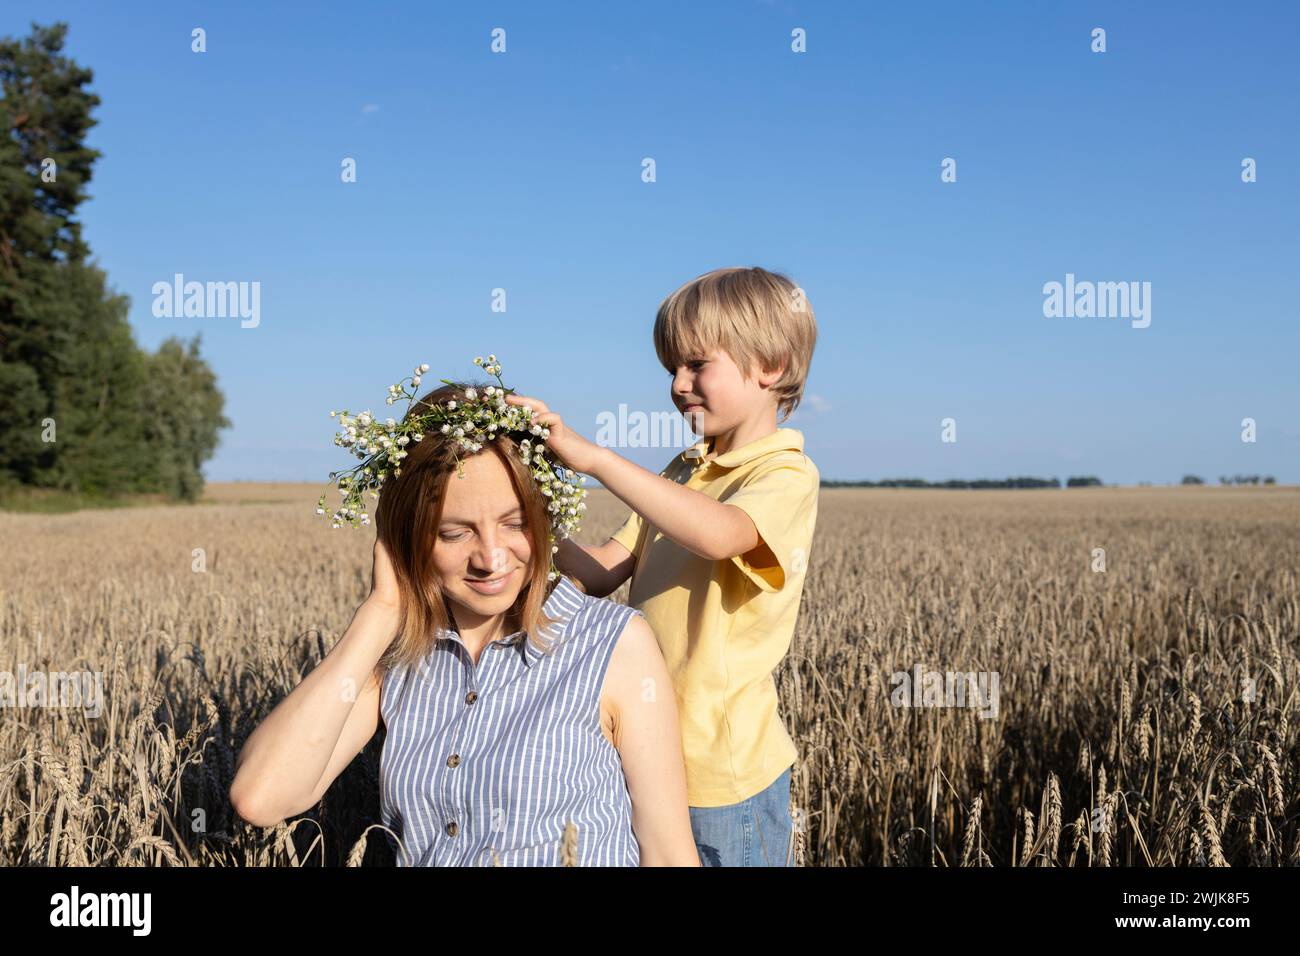 happy family, mother and son in a wheat field. The concept of parental love, motherhood. the boy puts a wreath of daisies on his mothers head. enjoy n Stock Photo